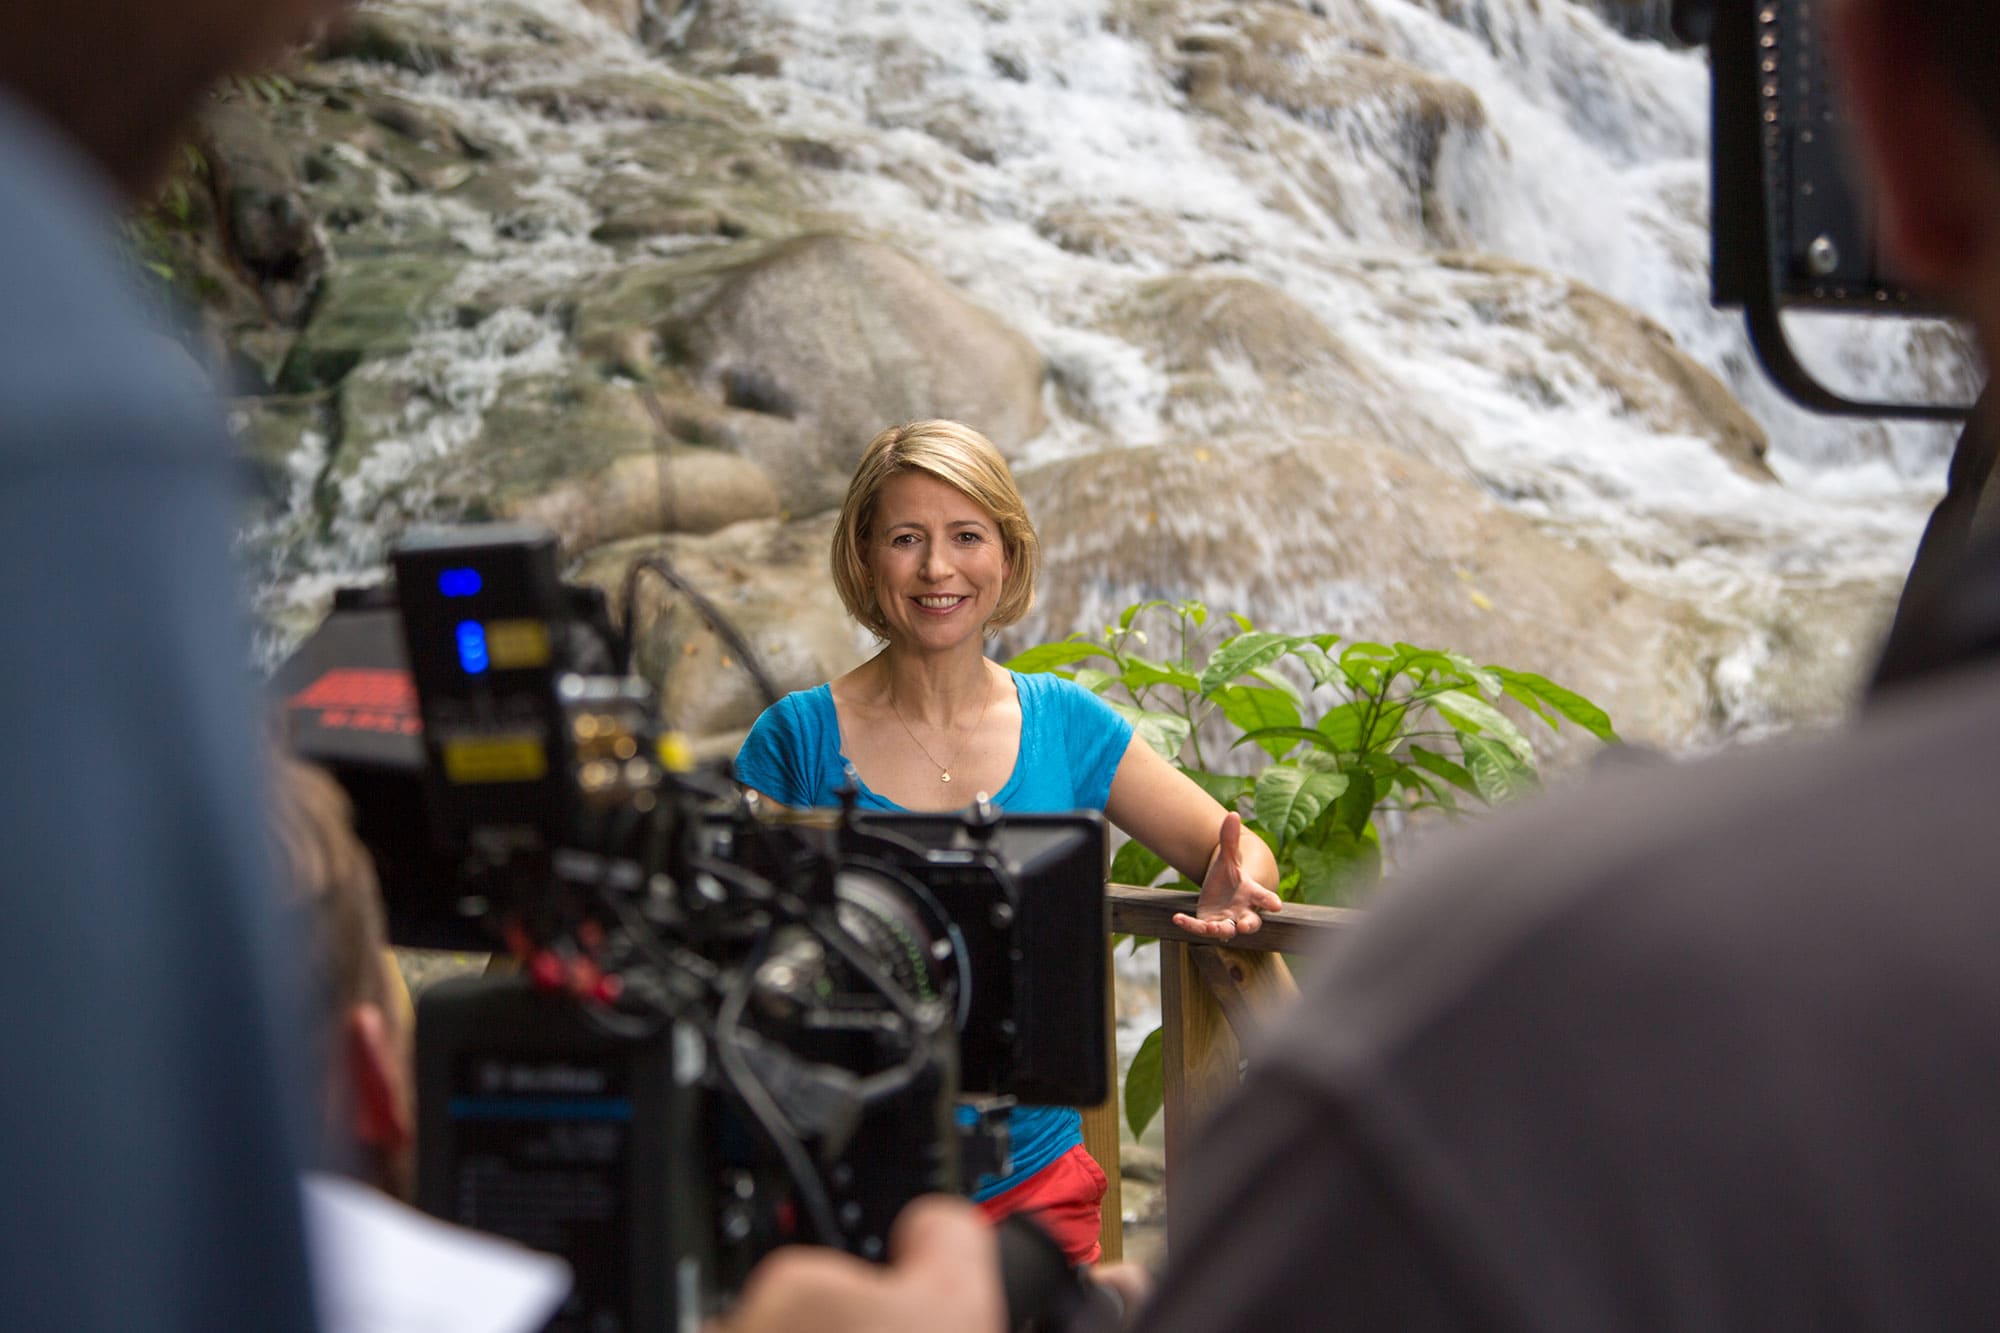 Does Samantha Brown Need An Assistant?